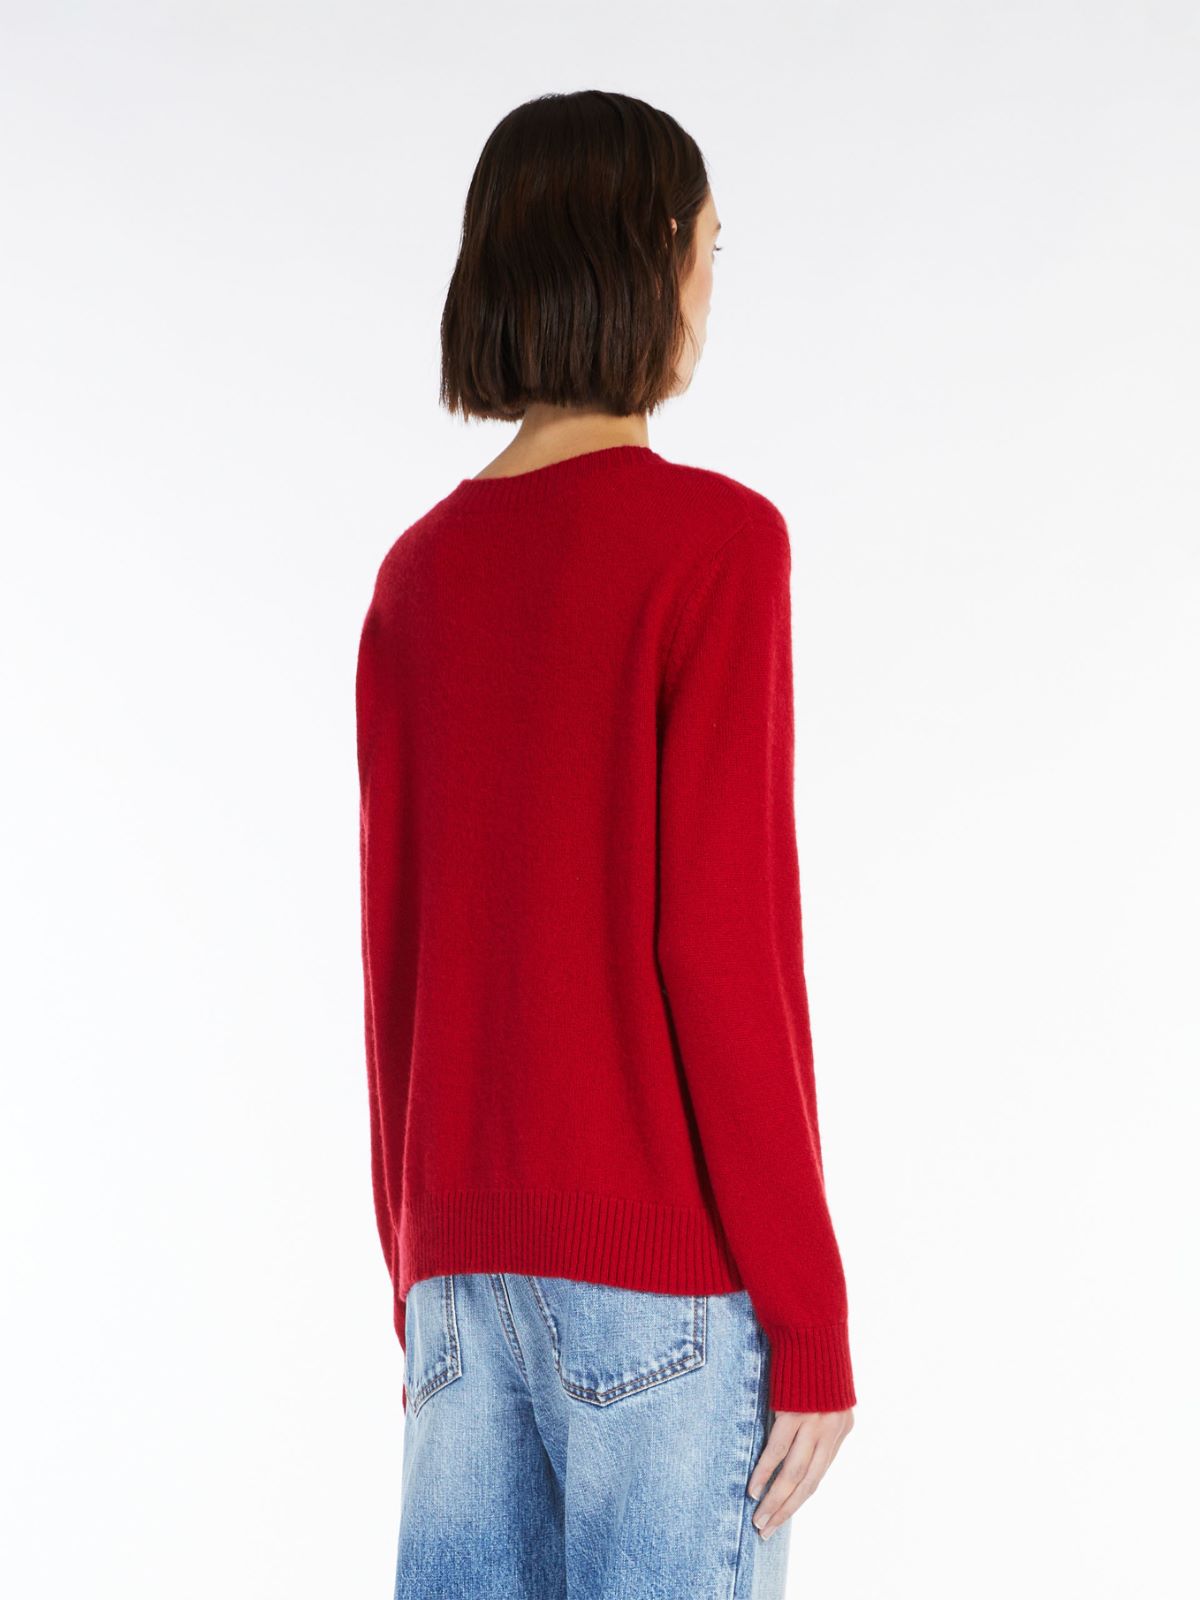 Cashmere sweater - RED - Weekend Max Mara - 3